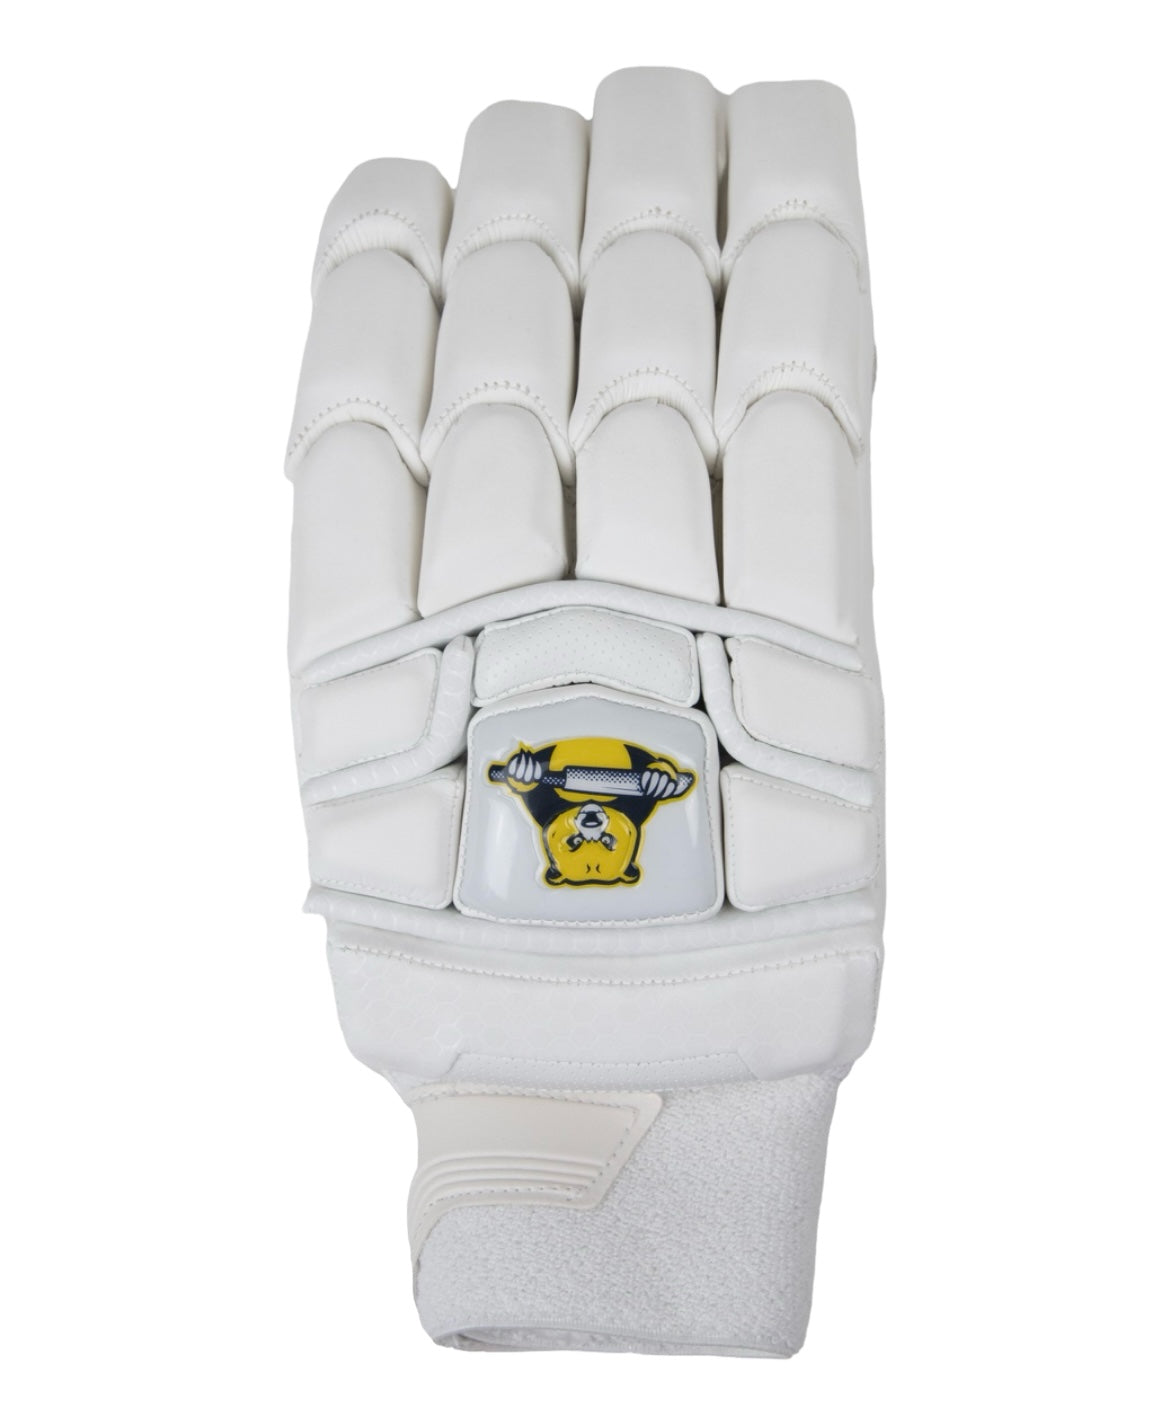 Bear Cricket Players Edition Batting Gloves - The Cricket Store